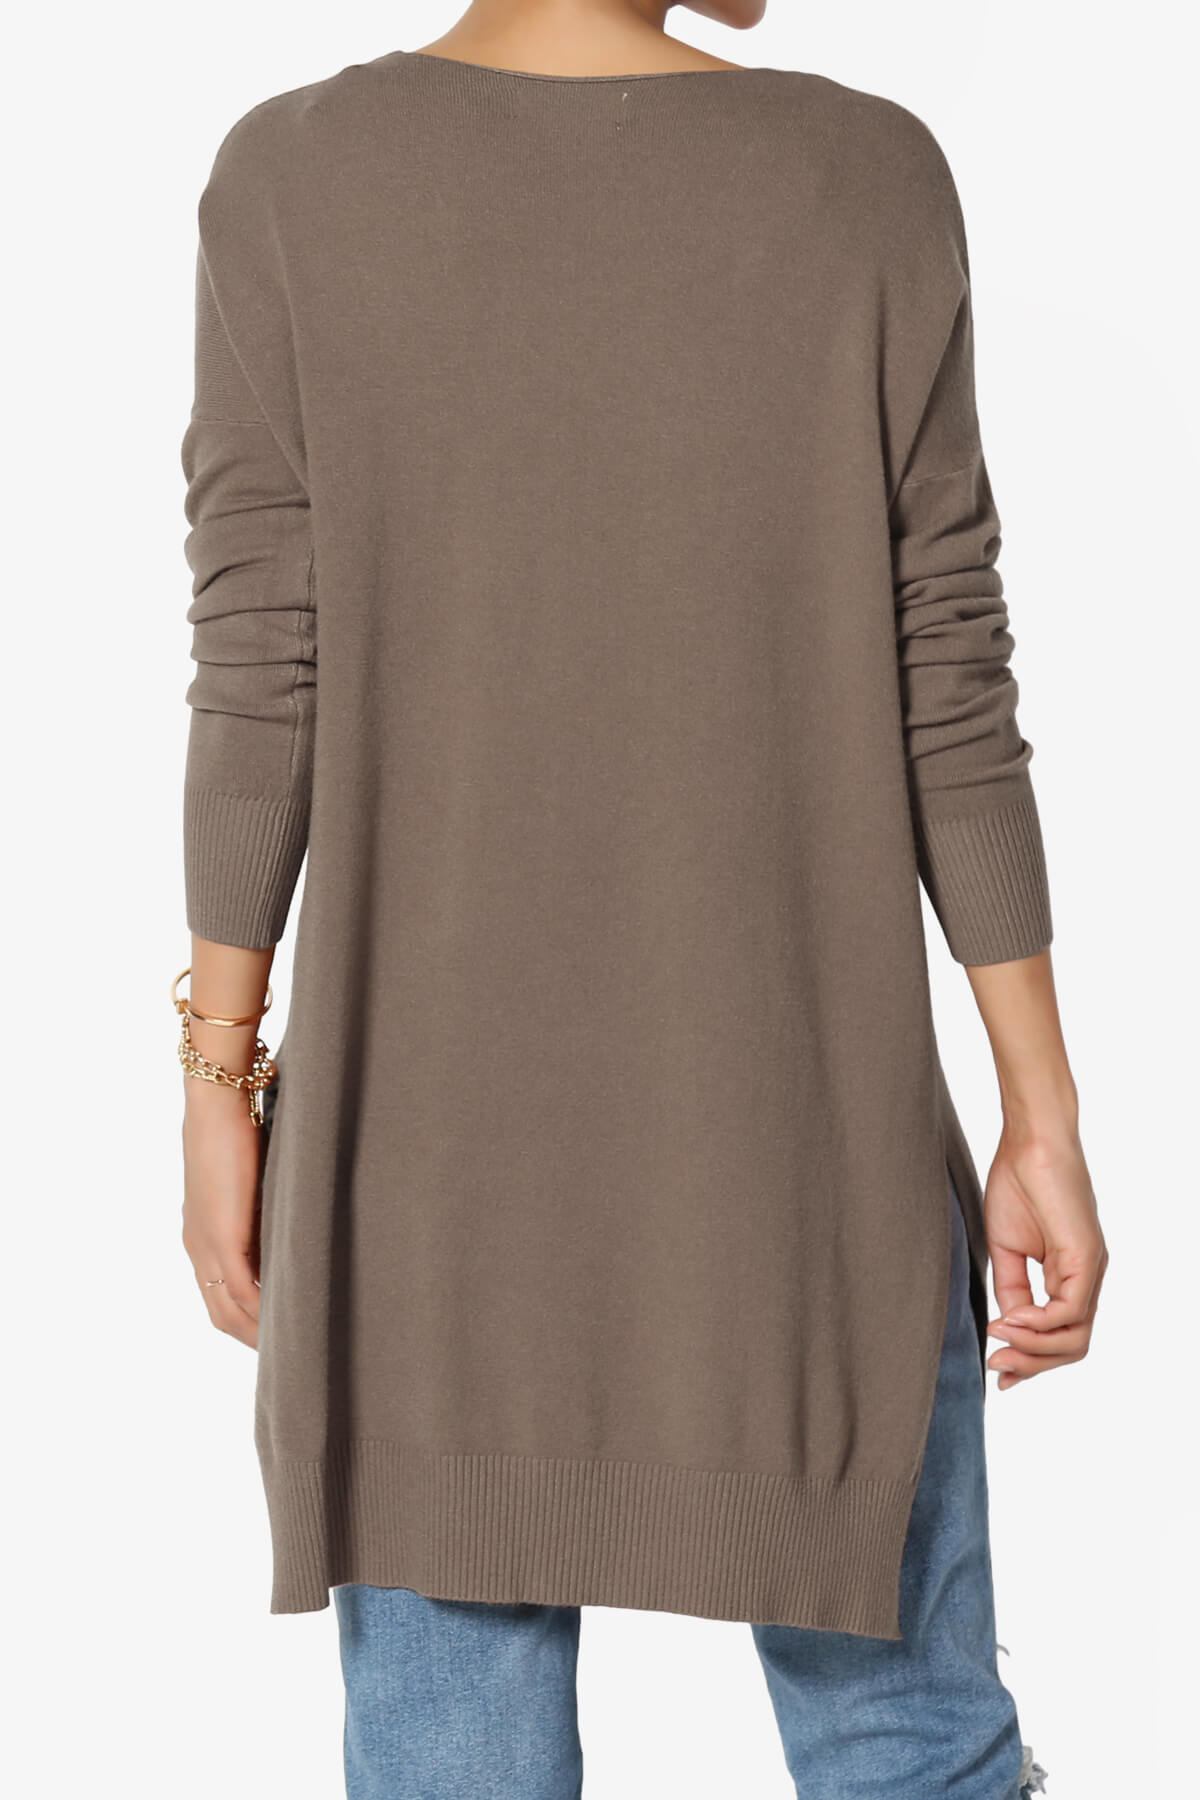 Load image into Gallery viewer, Katana Front Seam V-Neck Knit Sweater MOCHA_2
